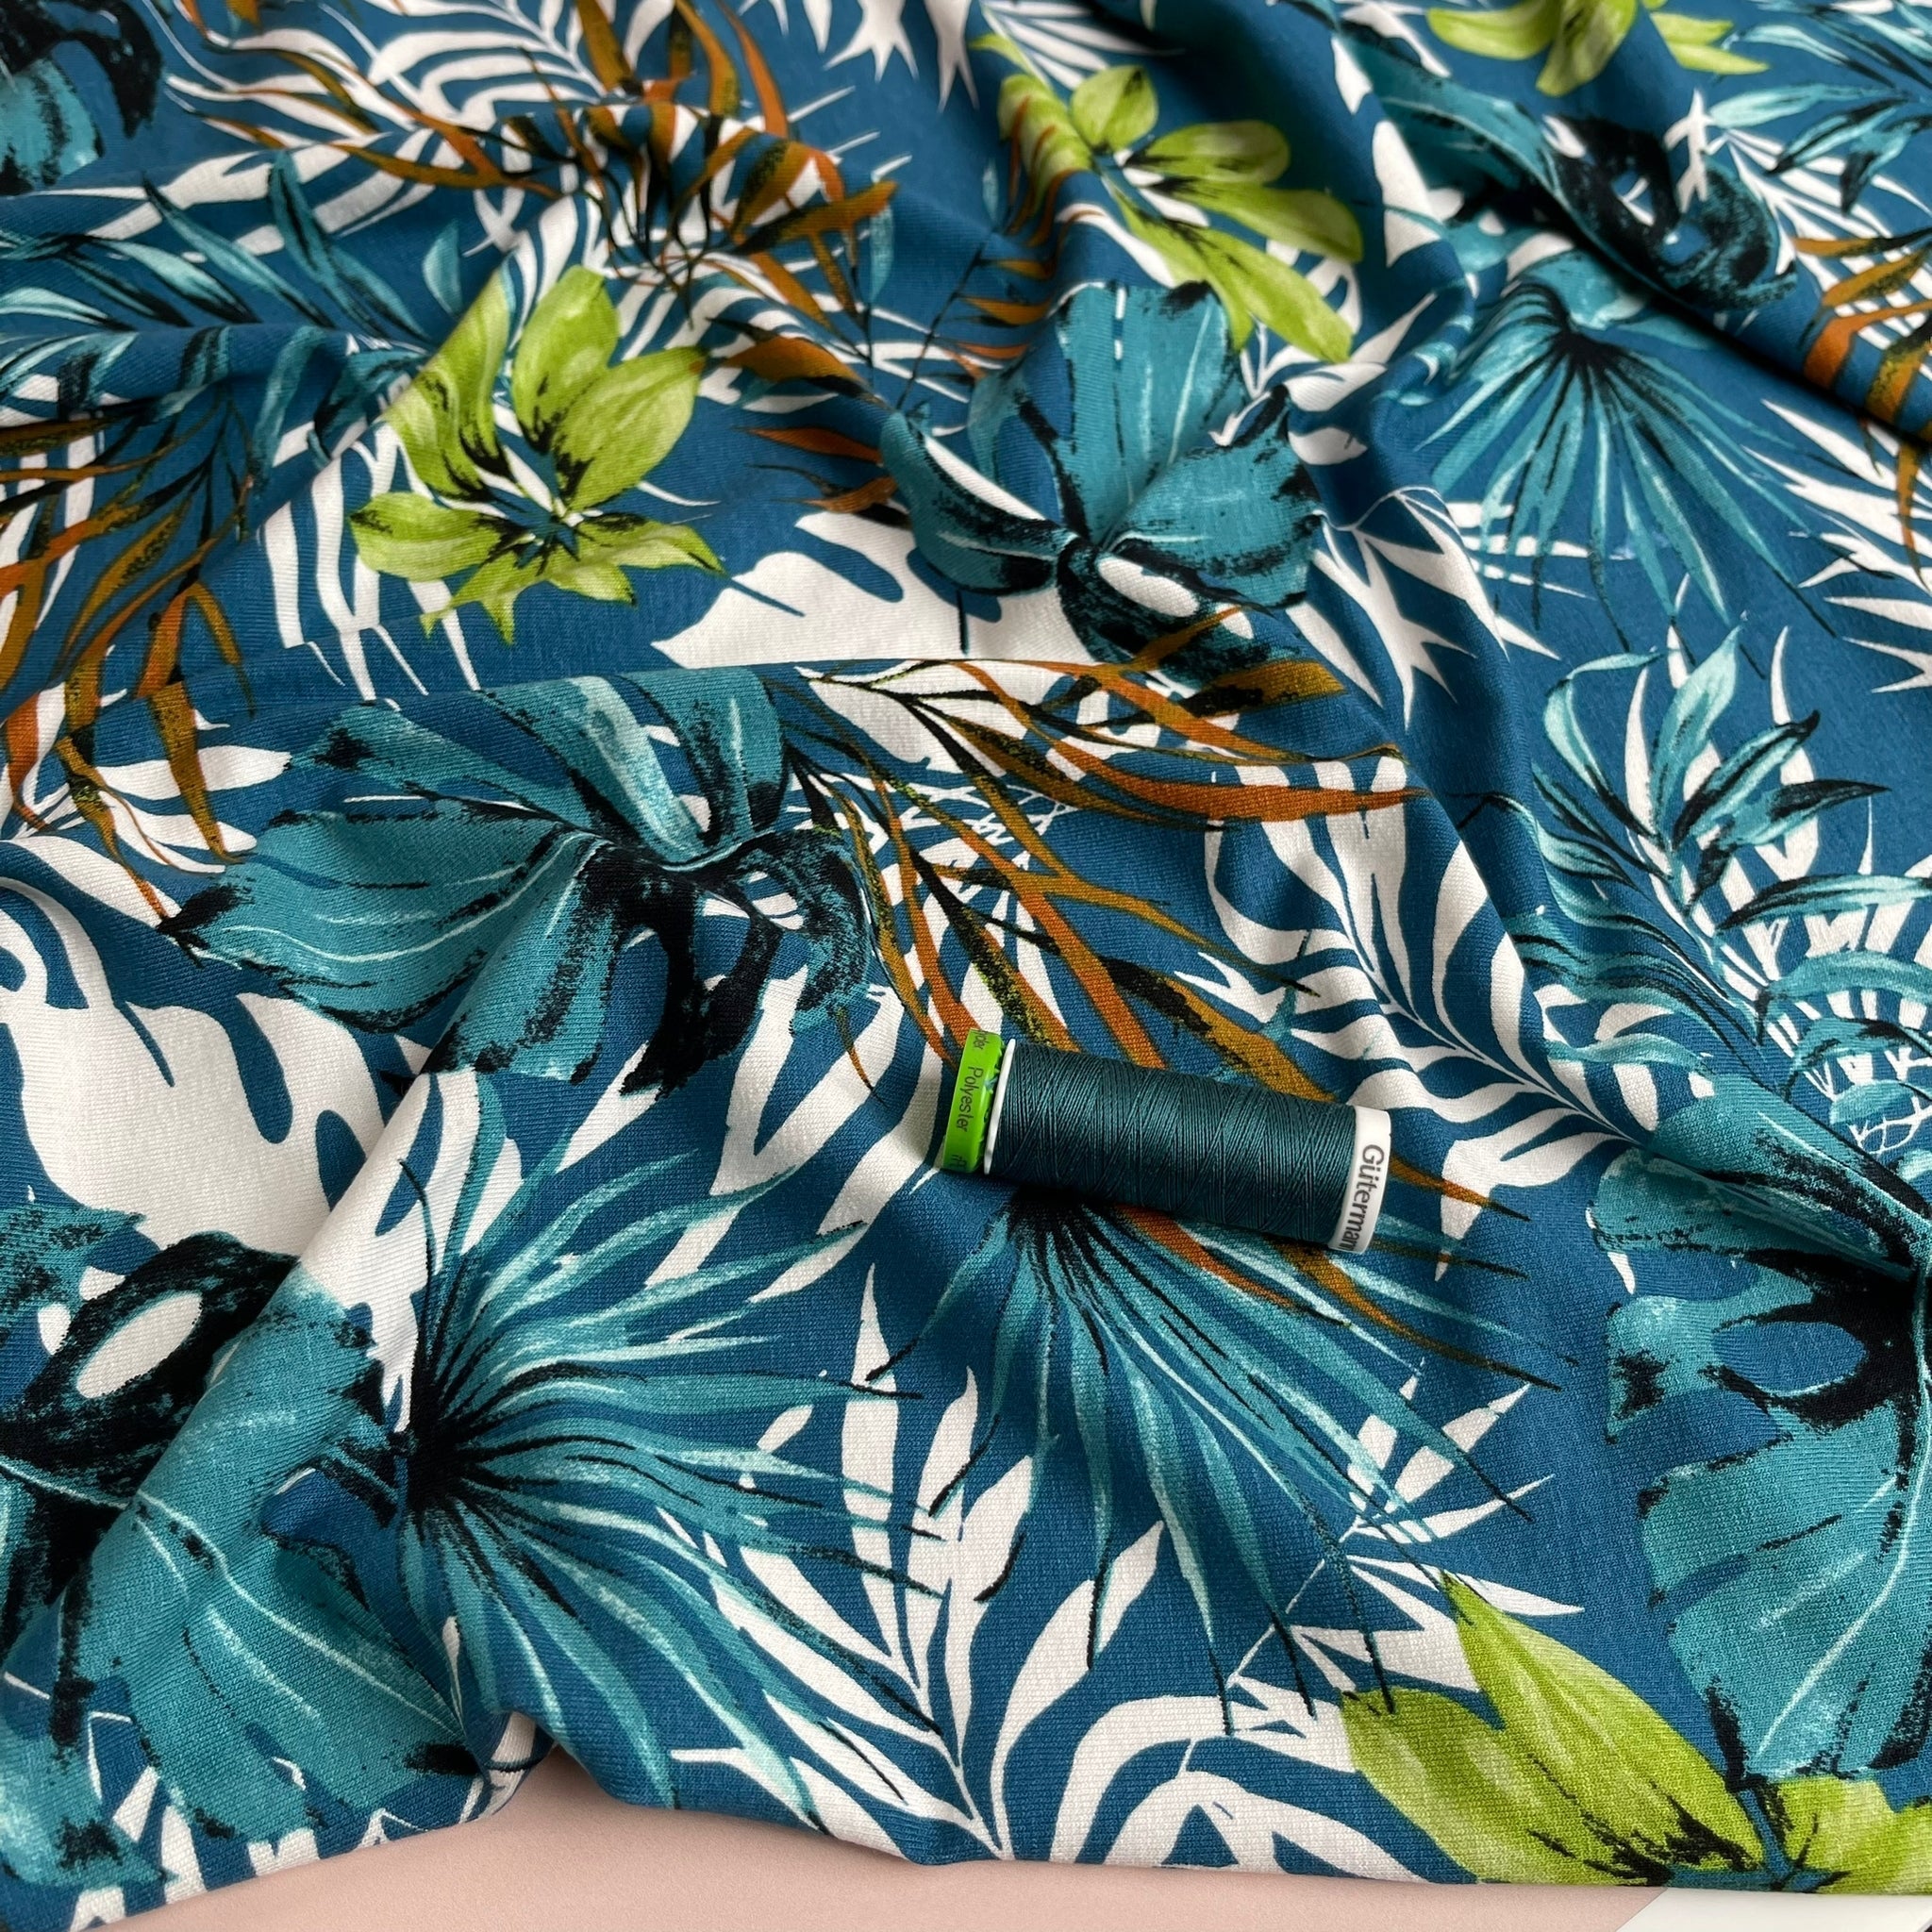 Sewing Kit - Appleton Dress in Tropical Leaves Viscose Jersey